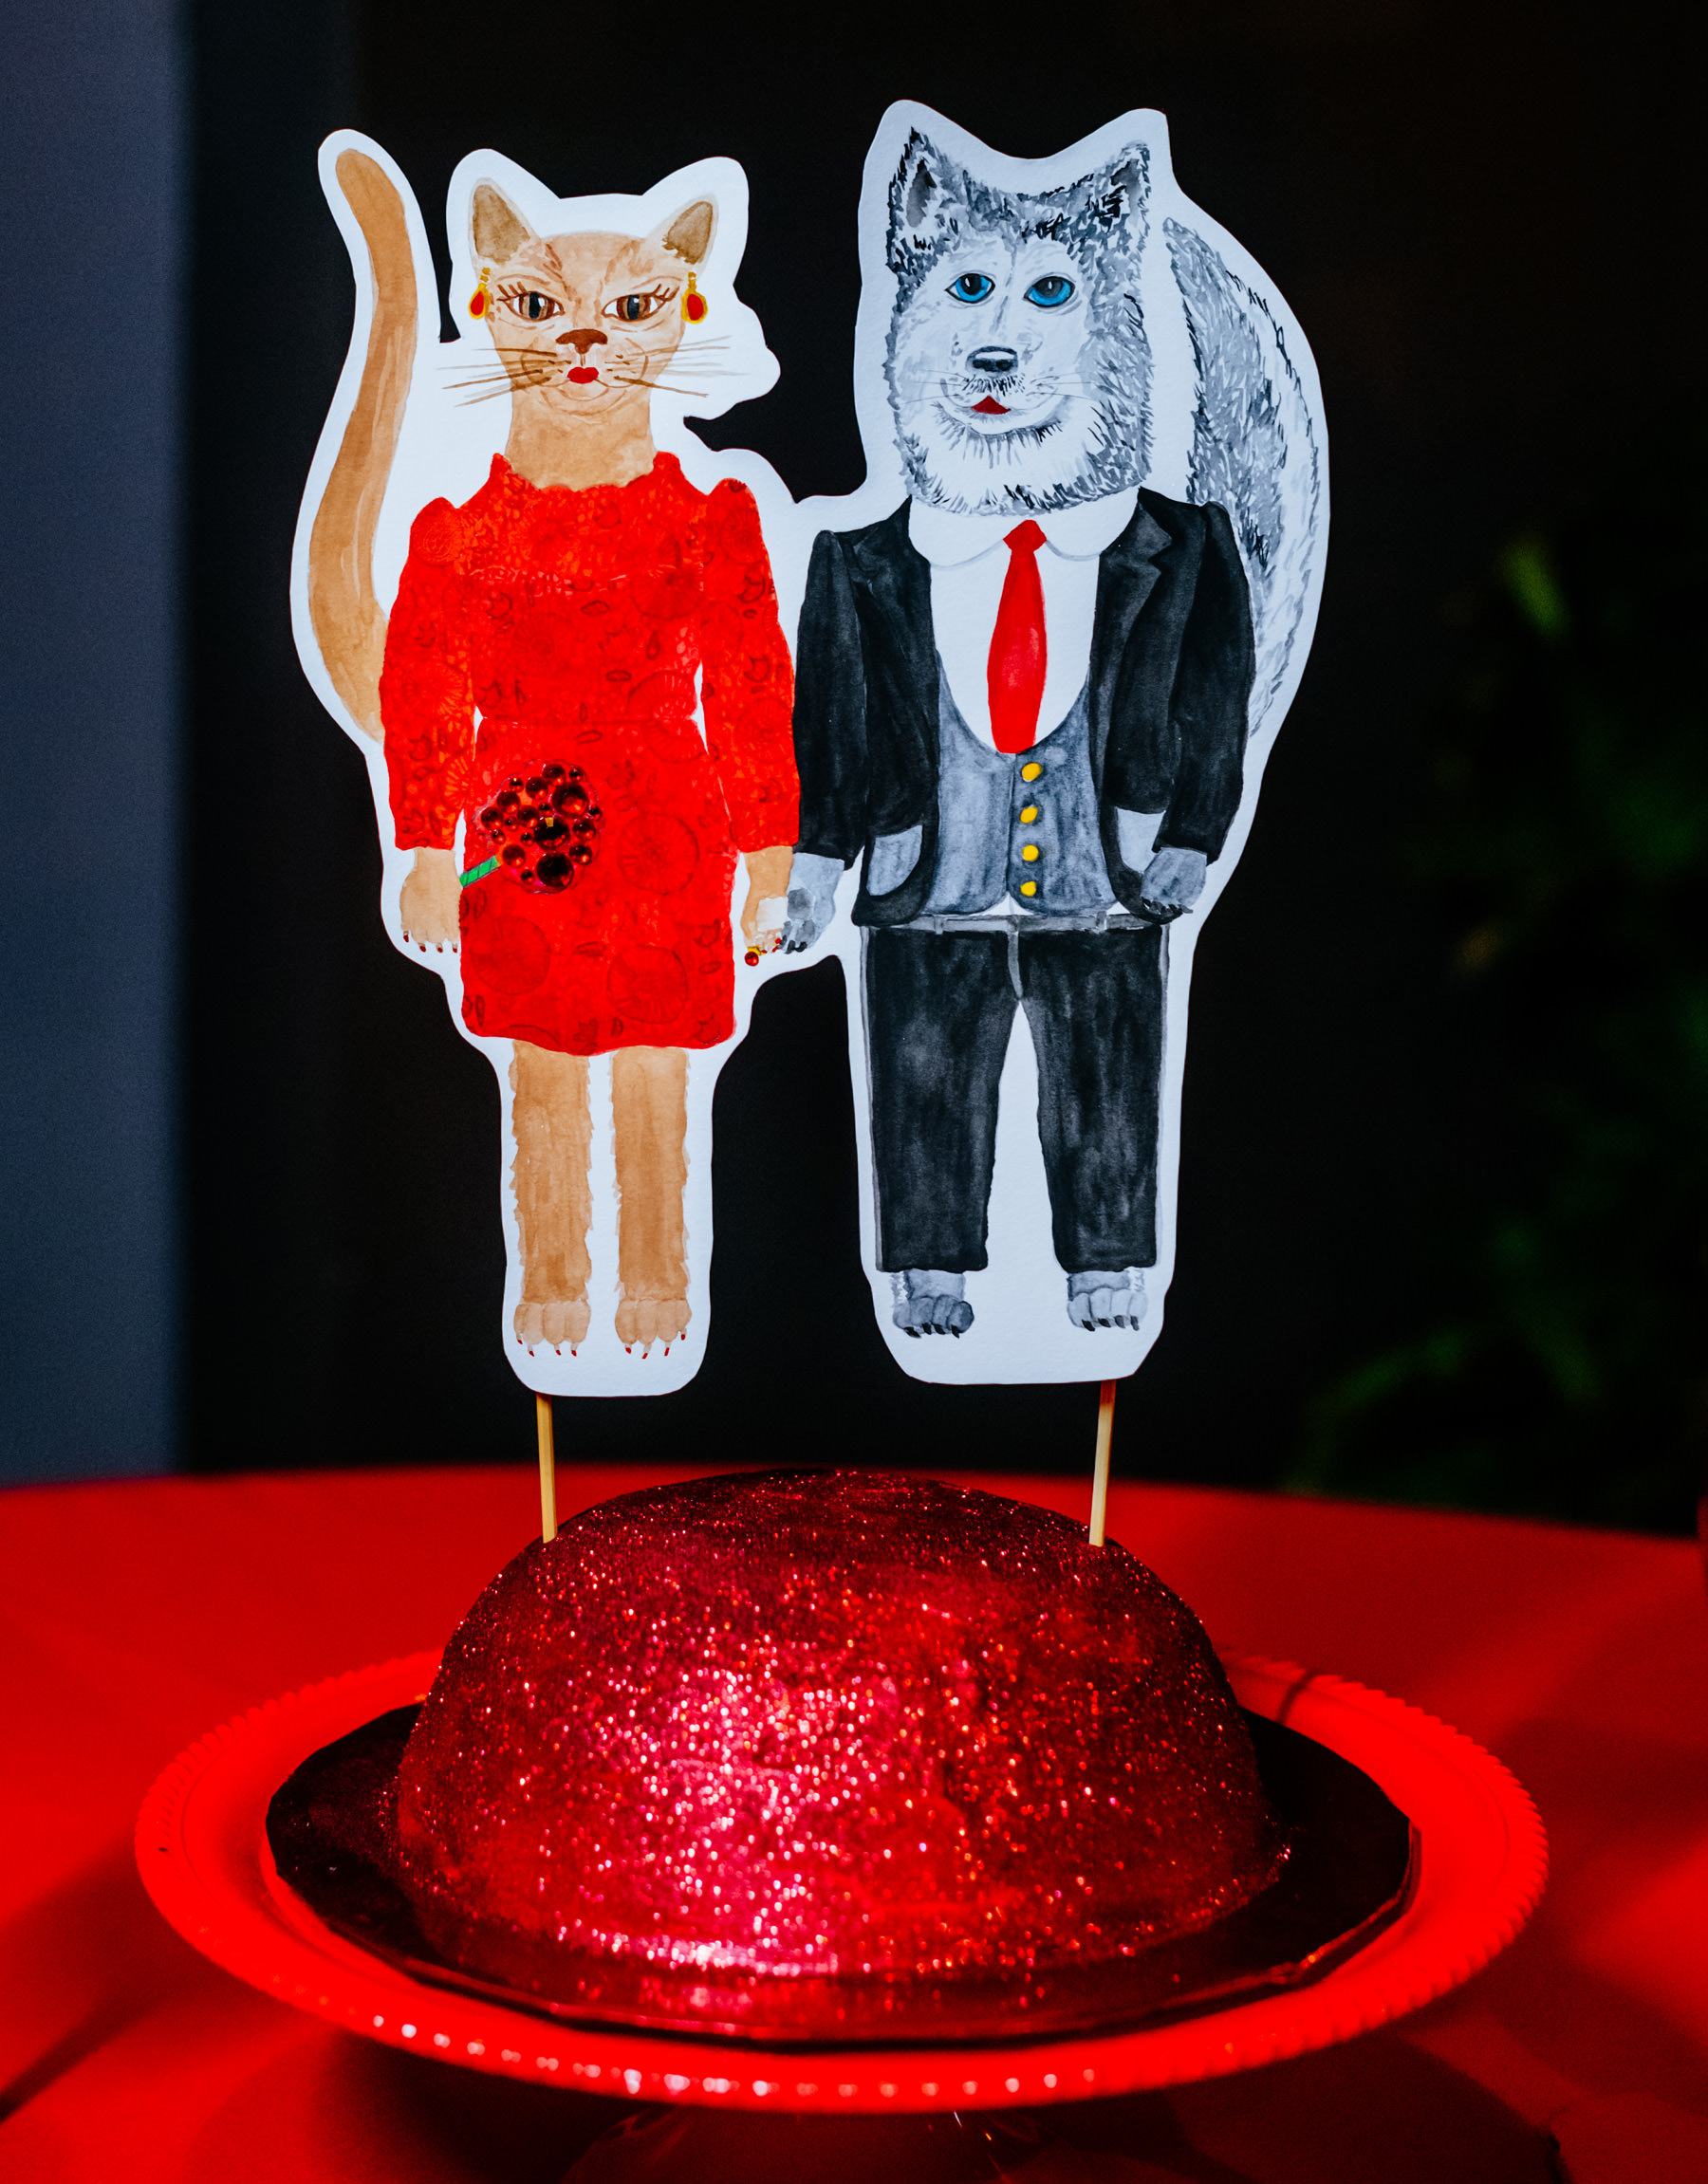 still maybe studios cake toppers by staci leech cornell